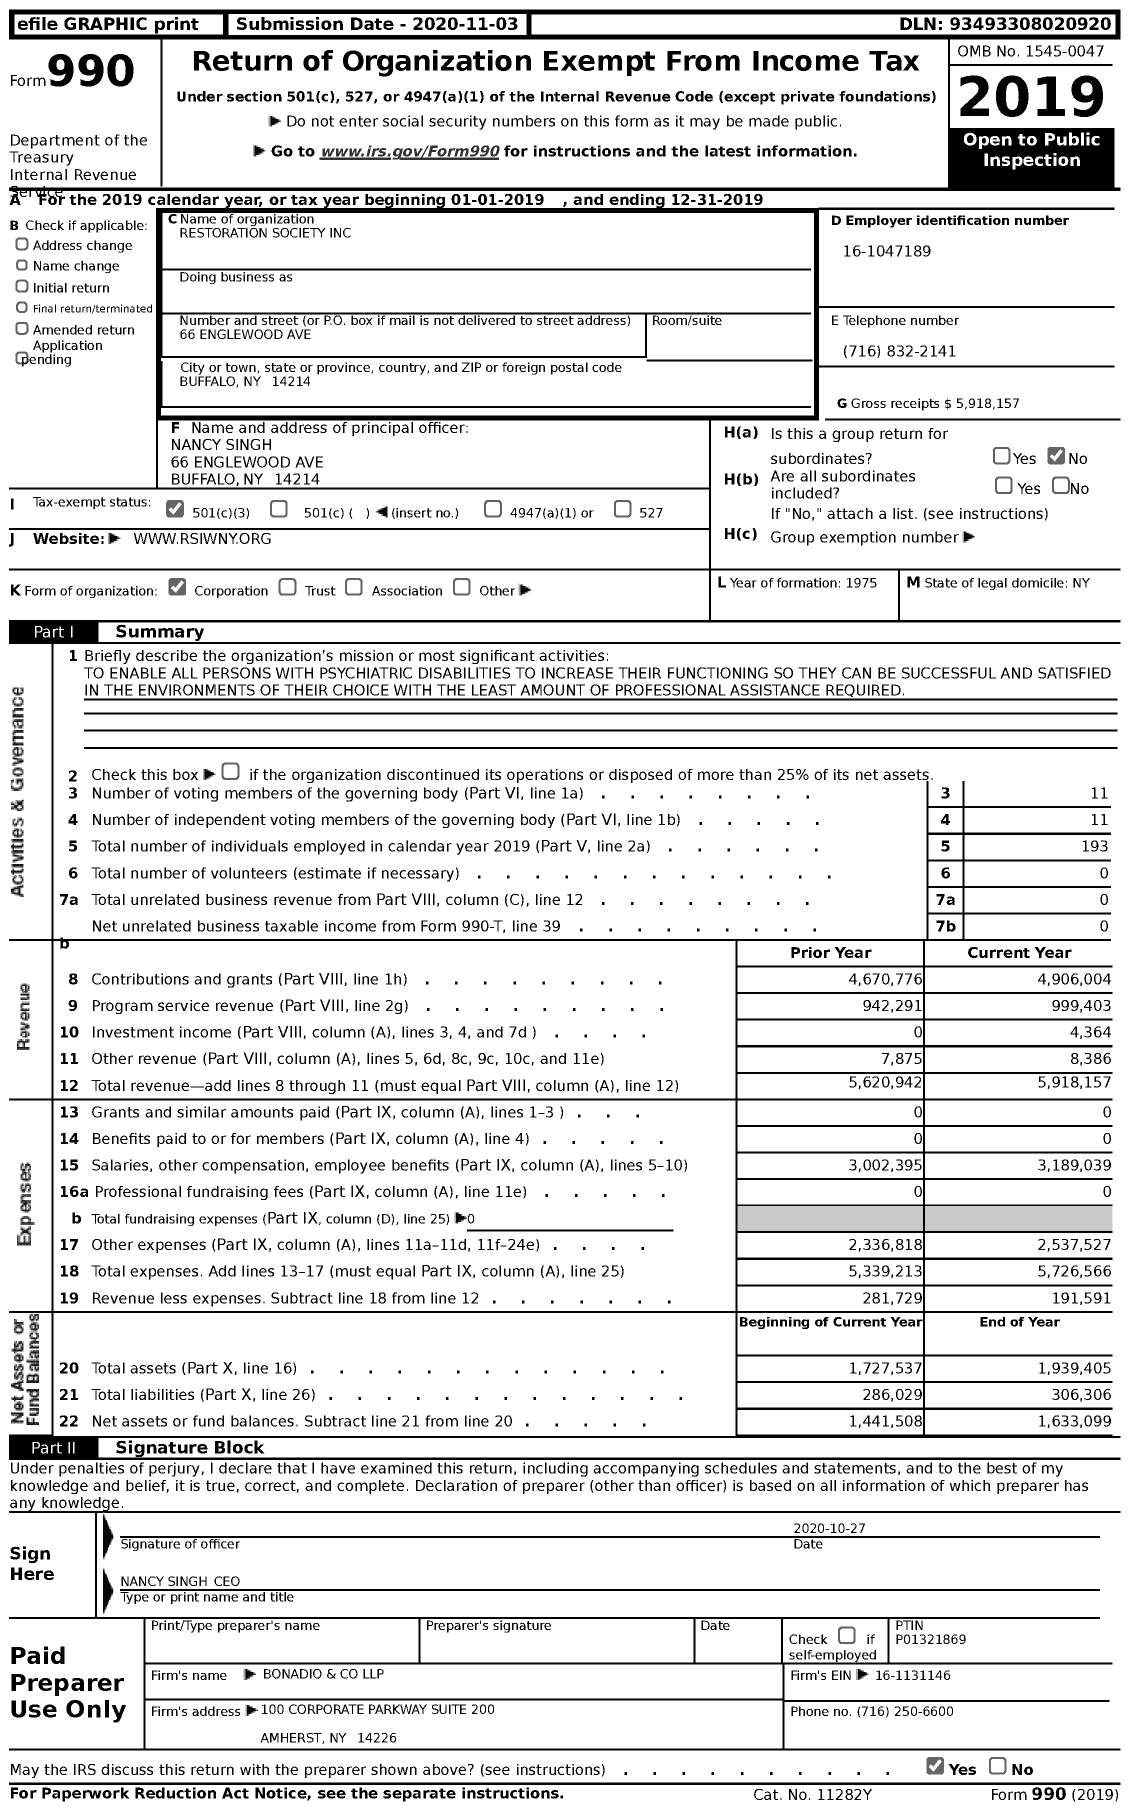 Image of first page of 2019 Form 990 for Restoration Society Incorporated (RSI)